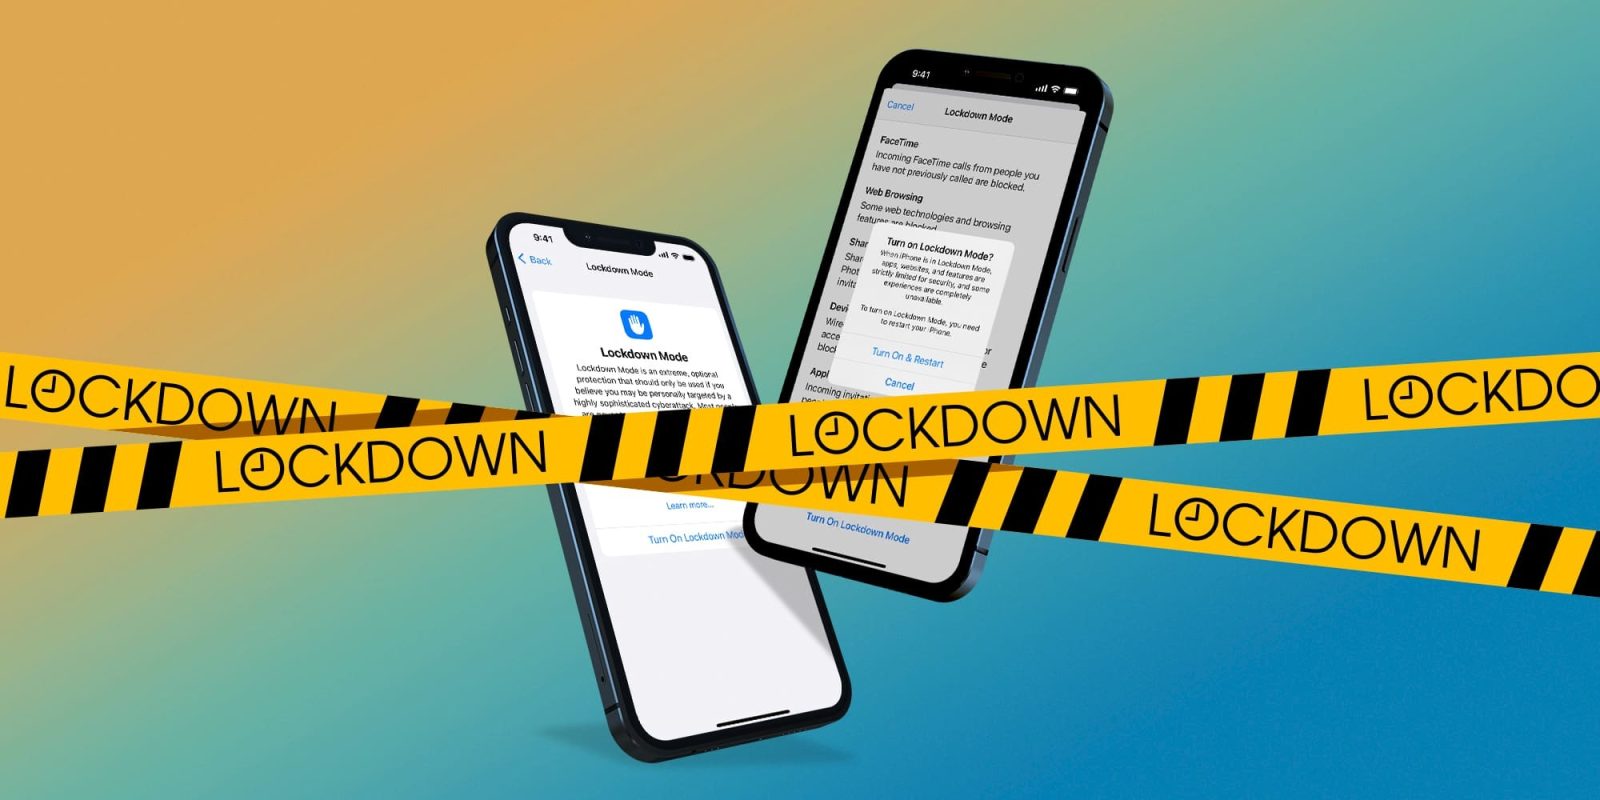 Here's how the new Lockdown Mode in iOS 16 restricts web browsing